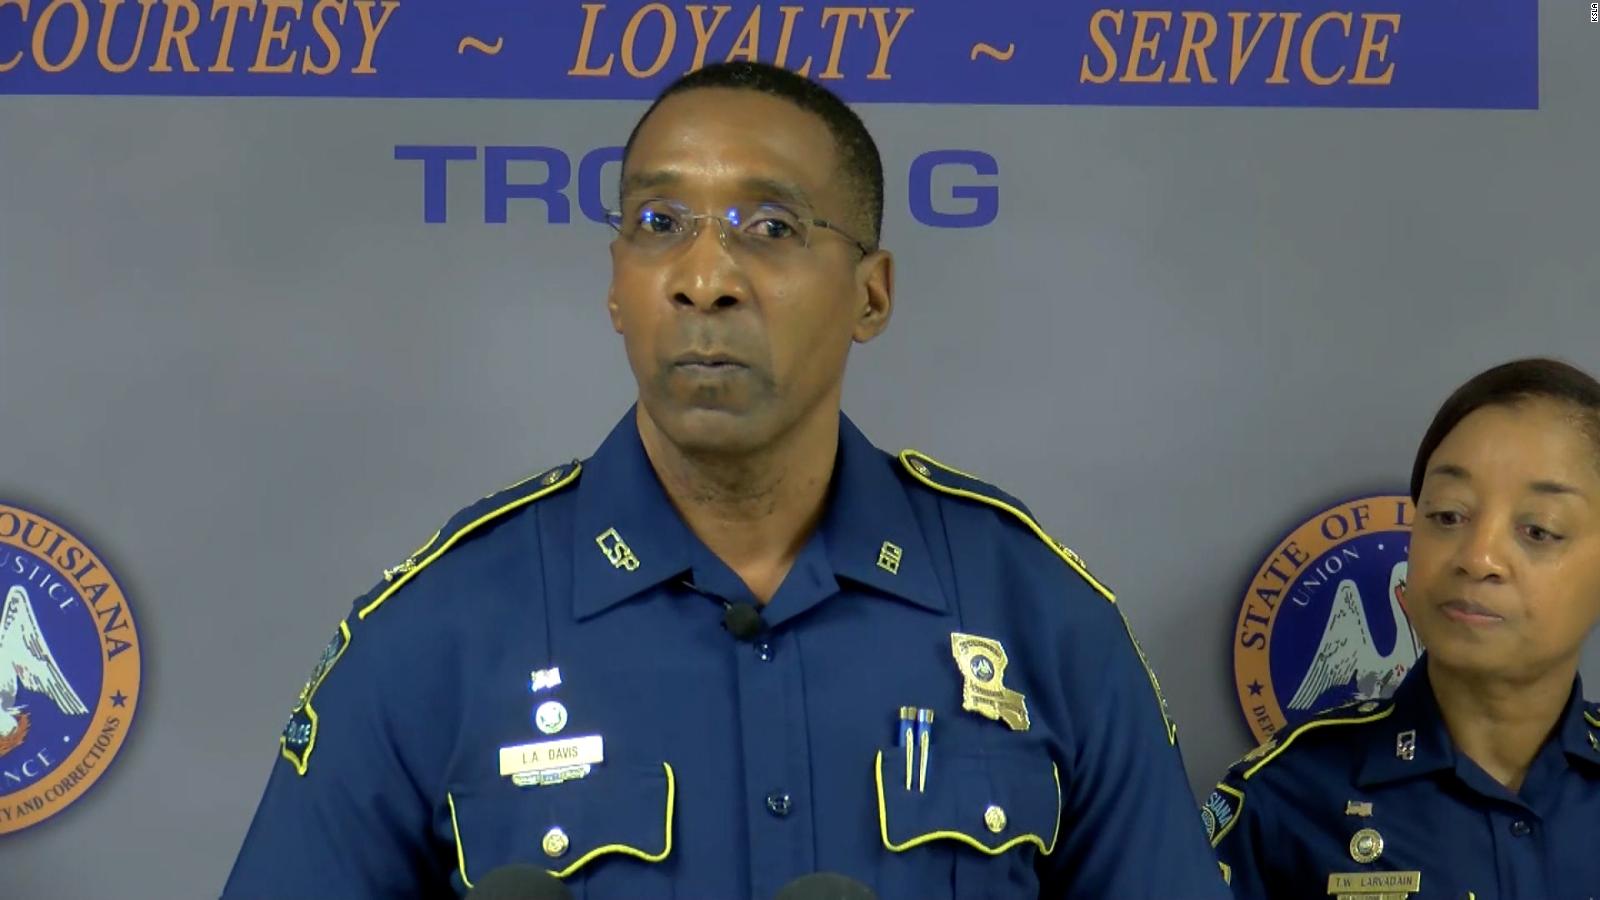 Shreveport Police Chief Mourns An Unarmed Black Man Shot Dead By One Of